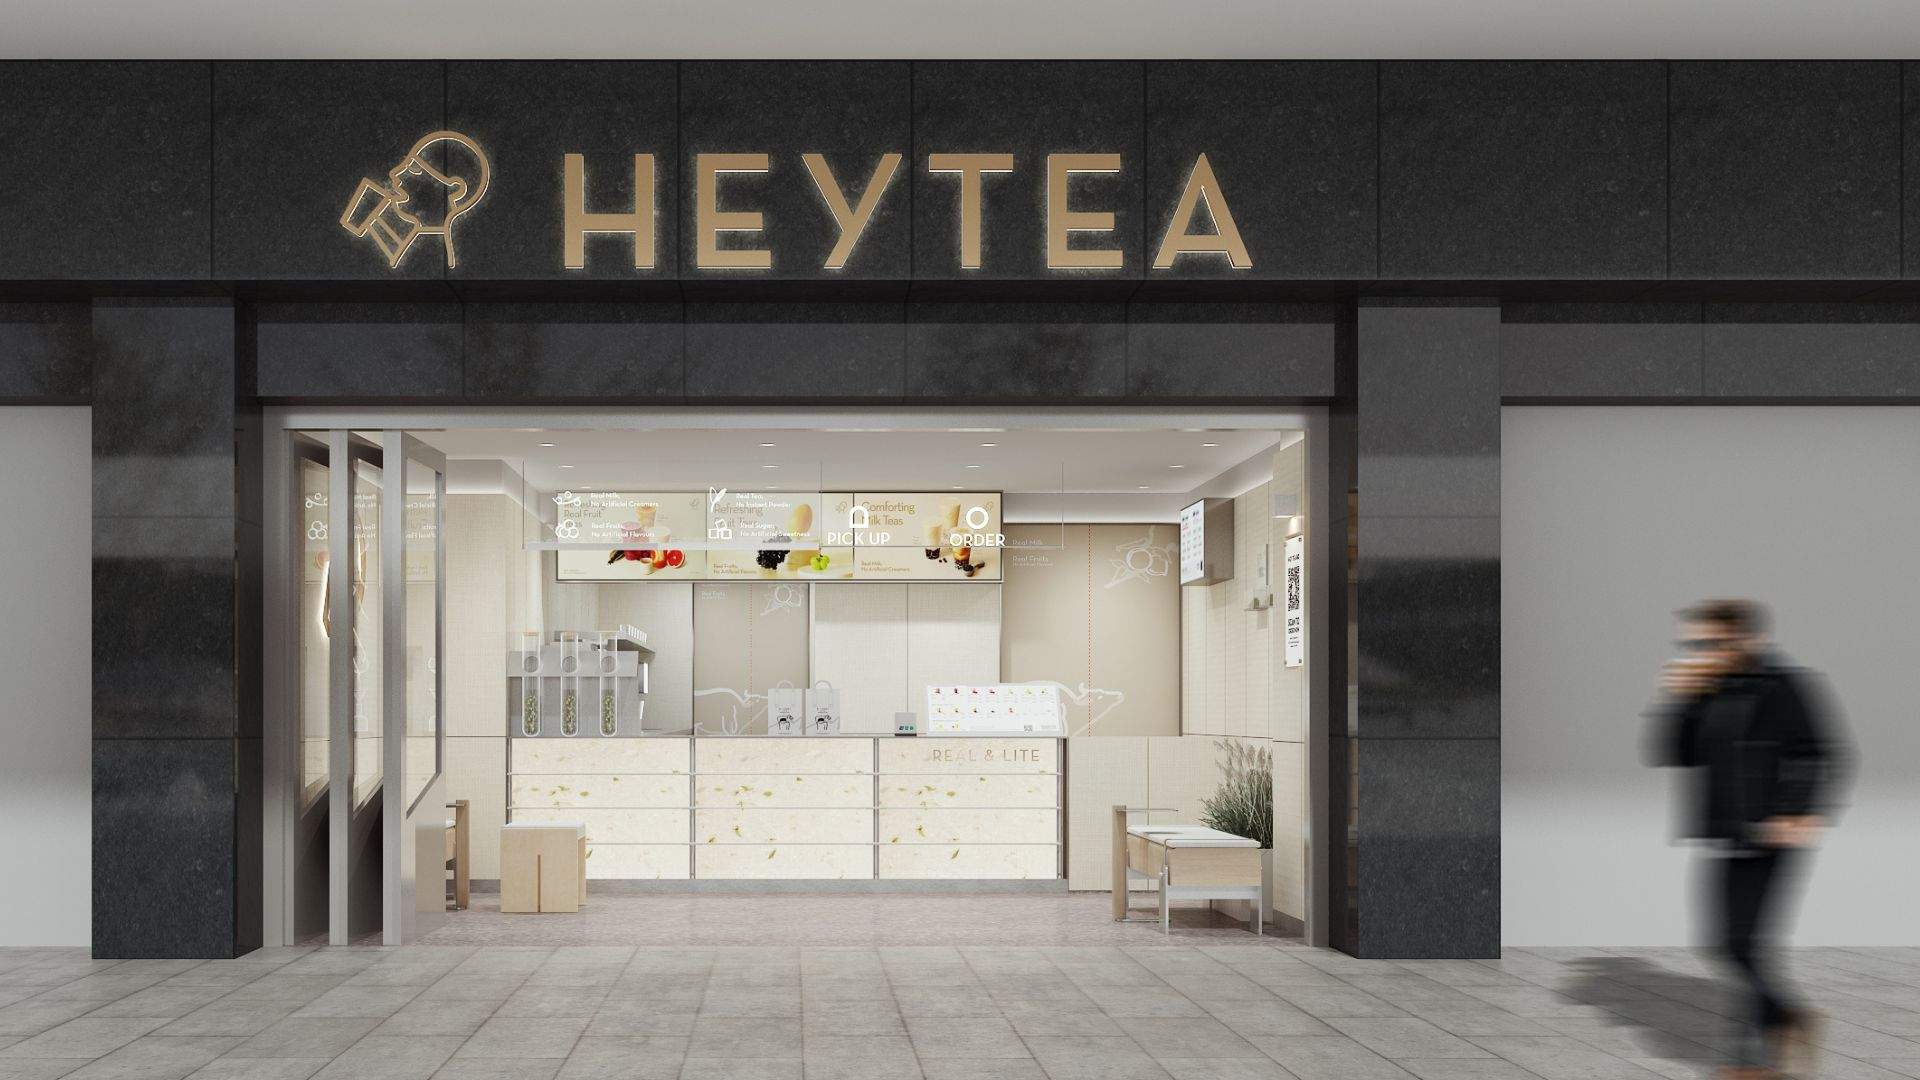 China's Globally Renowned Tea Brand HEYTEA Has Just Opened Its First Flagship Sydney Store In the CBD